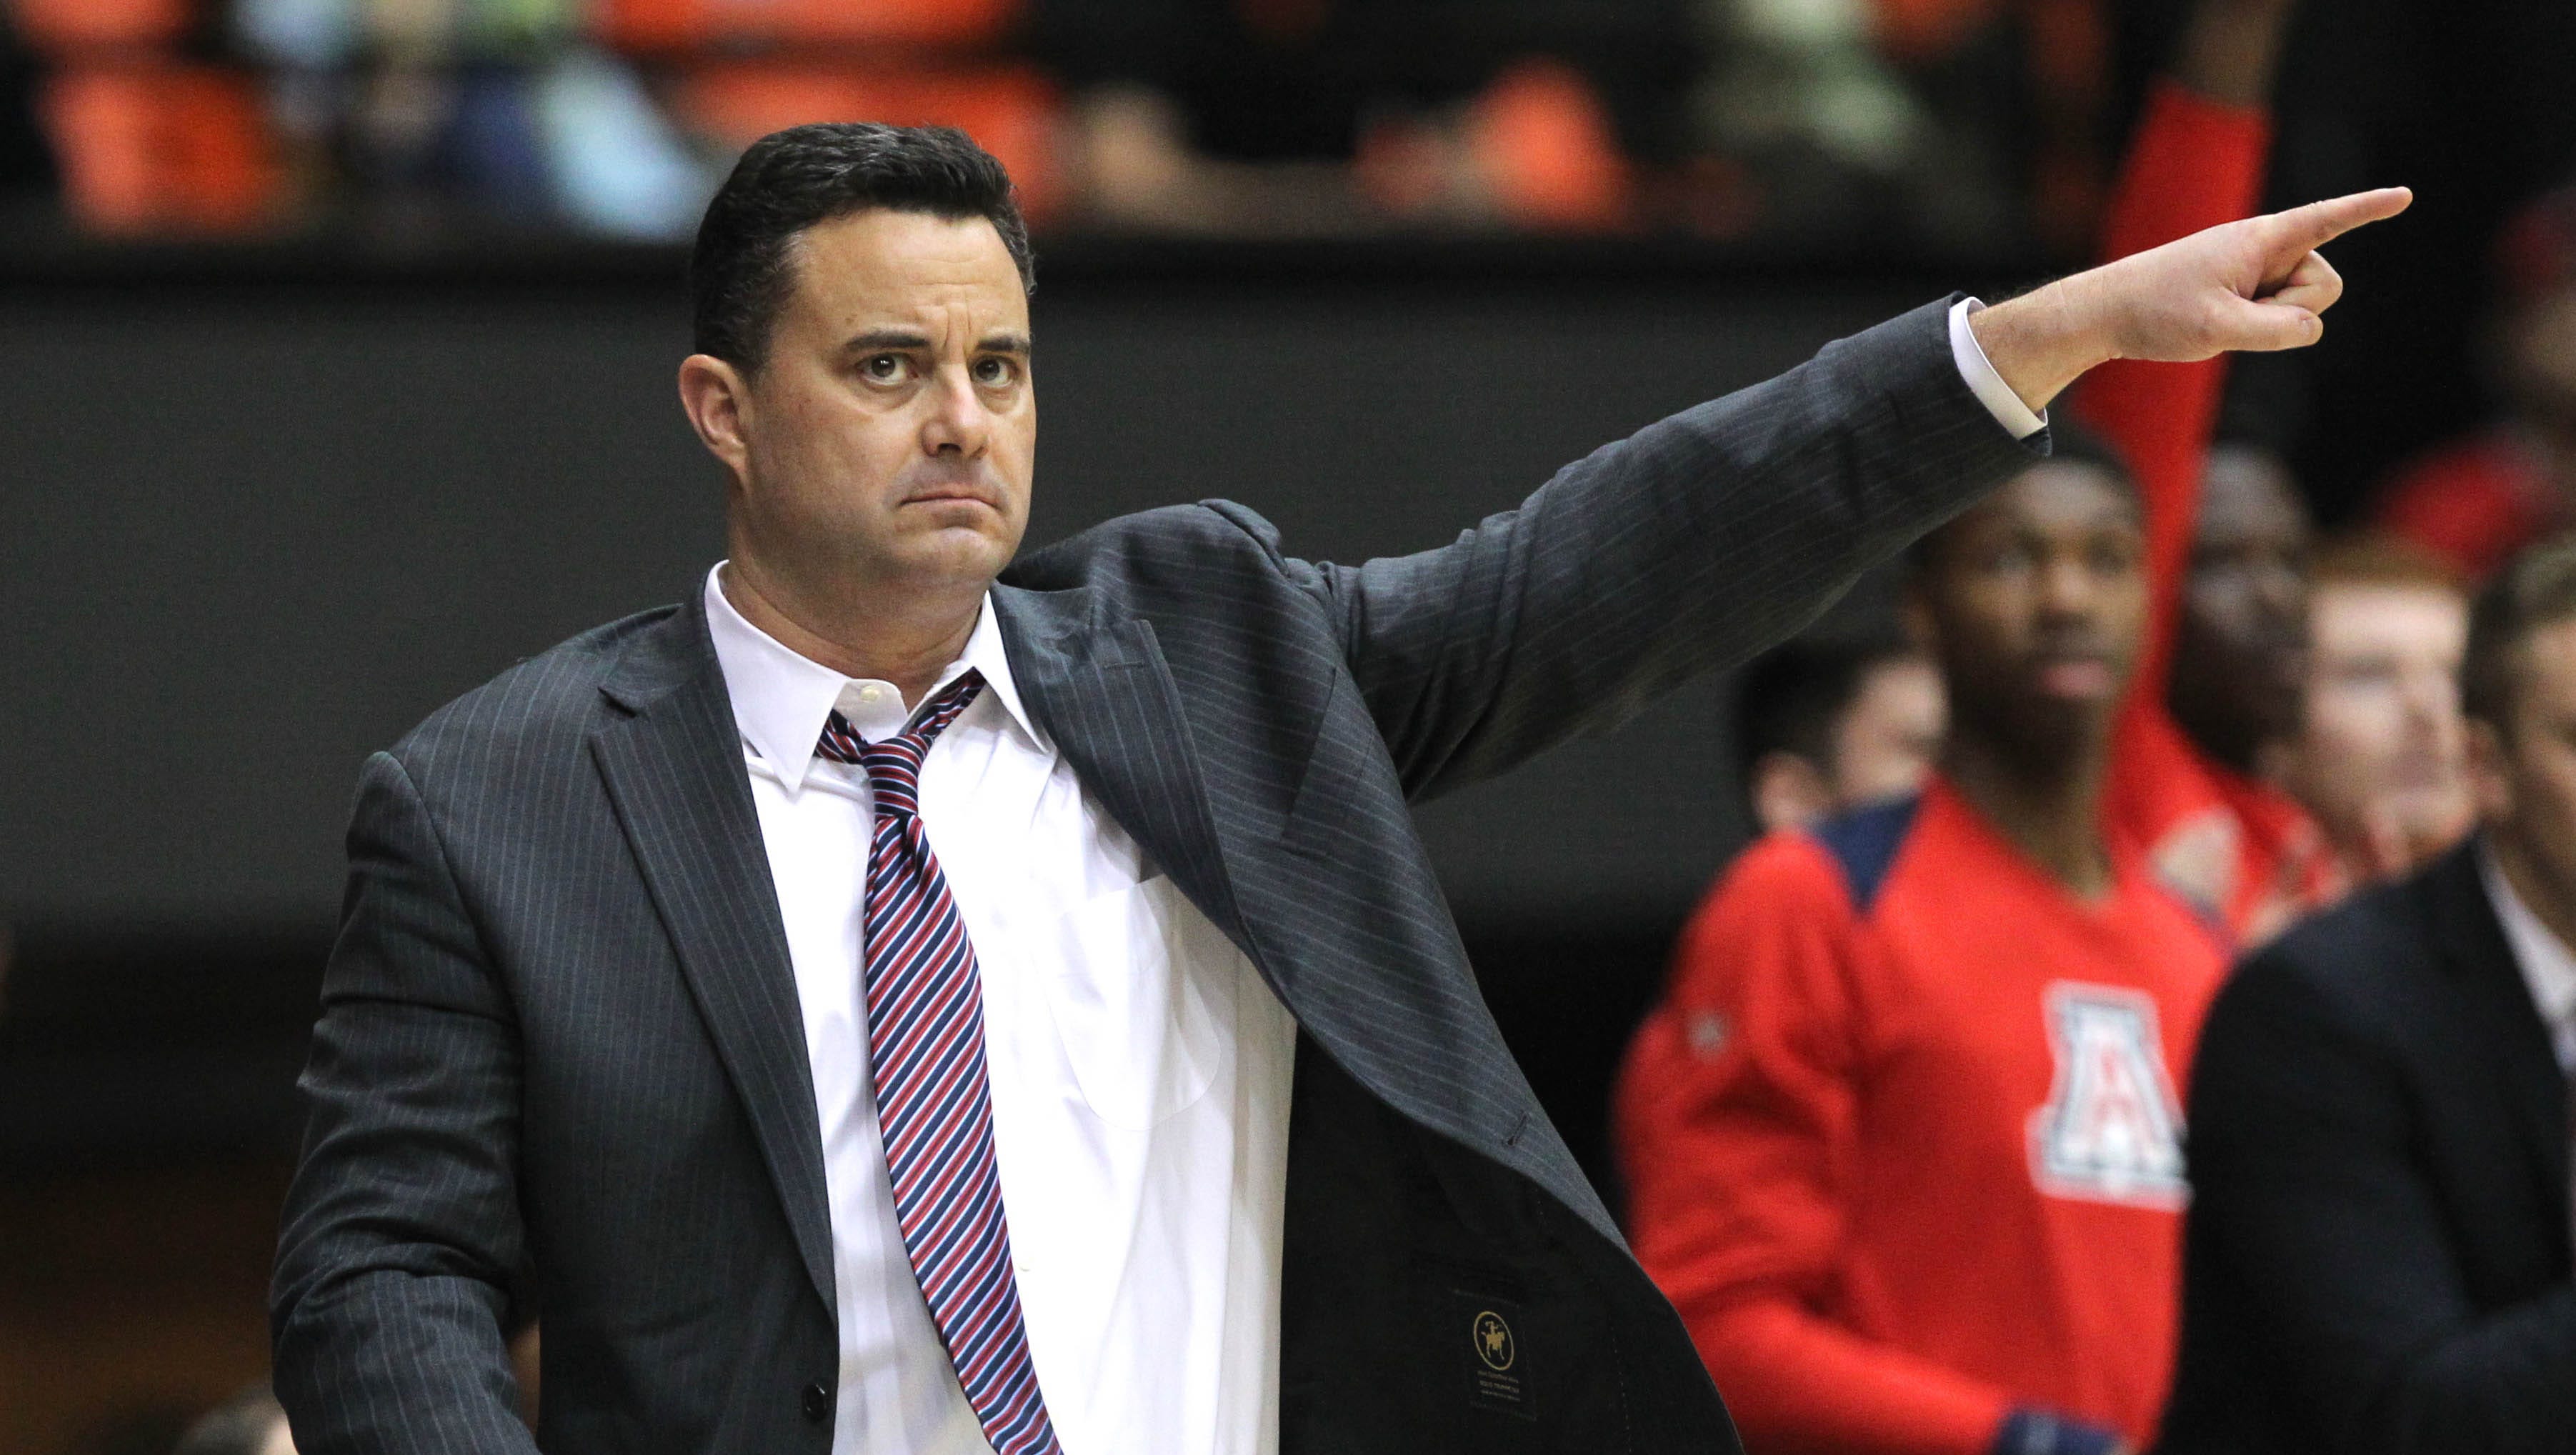 Arizona still has one more unnamed coach tied to the FBI investigation